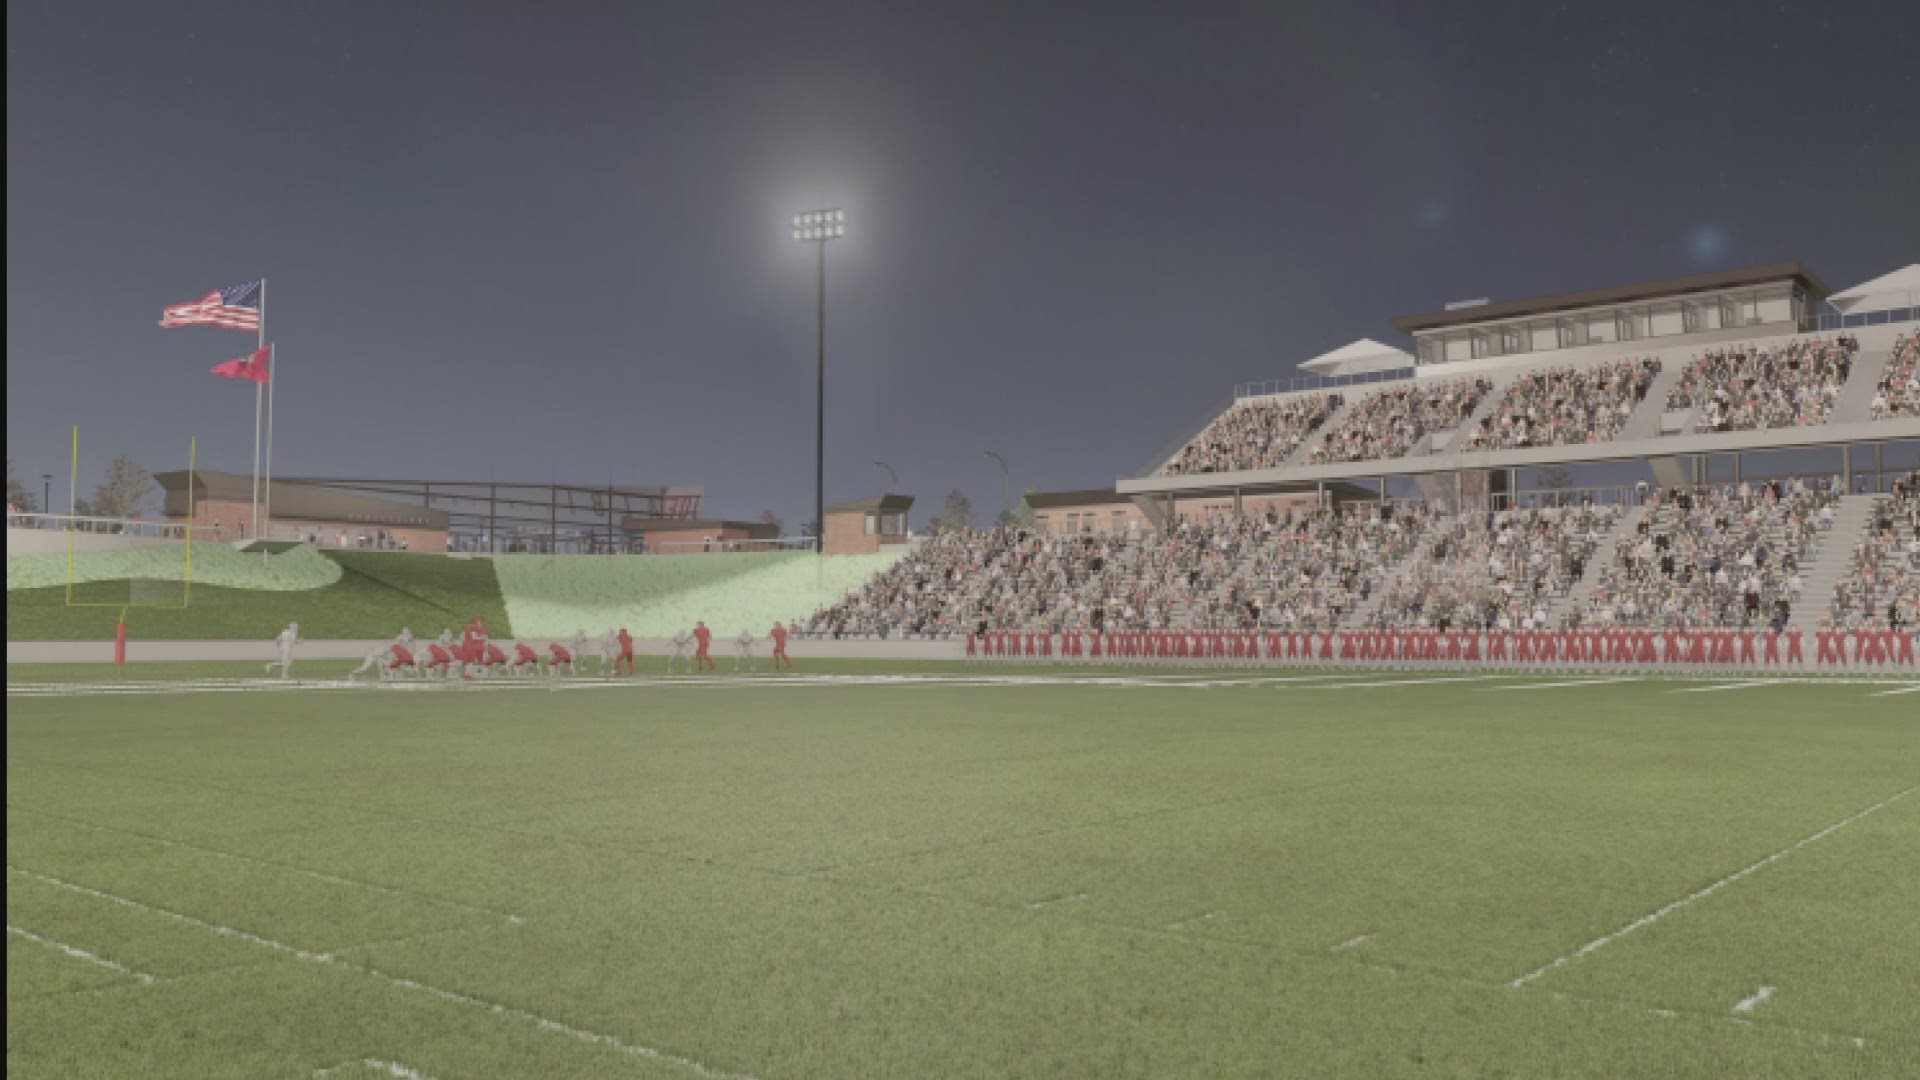 Renderings for the 5,000 seat stadium show a variety of specialized amenities.